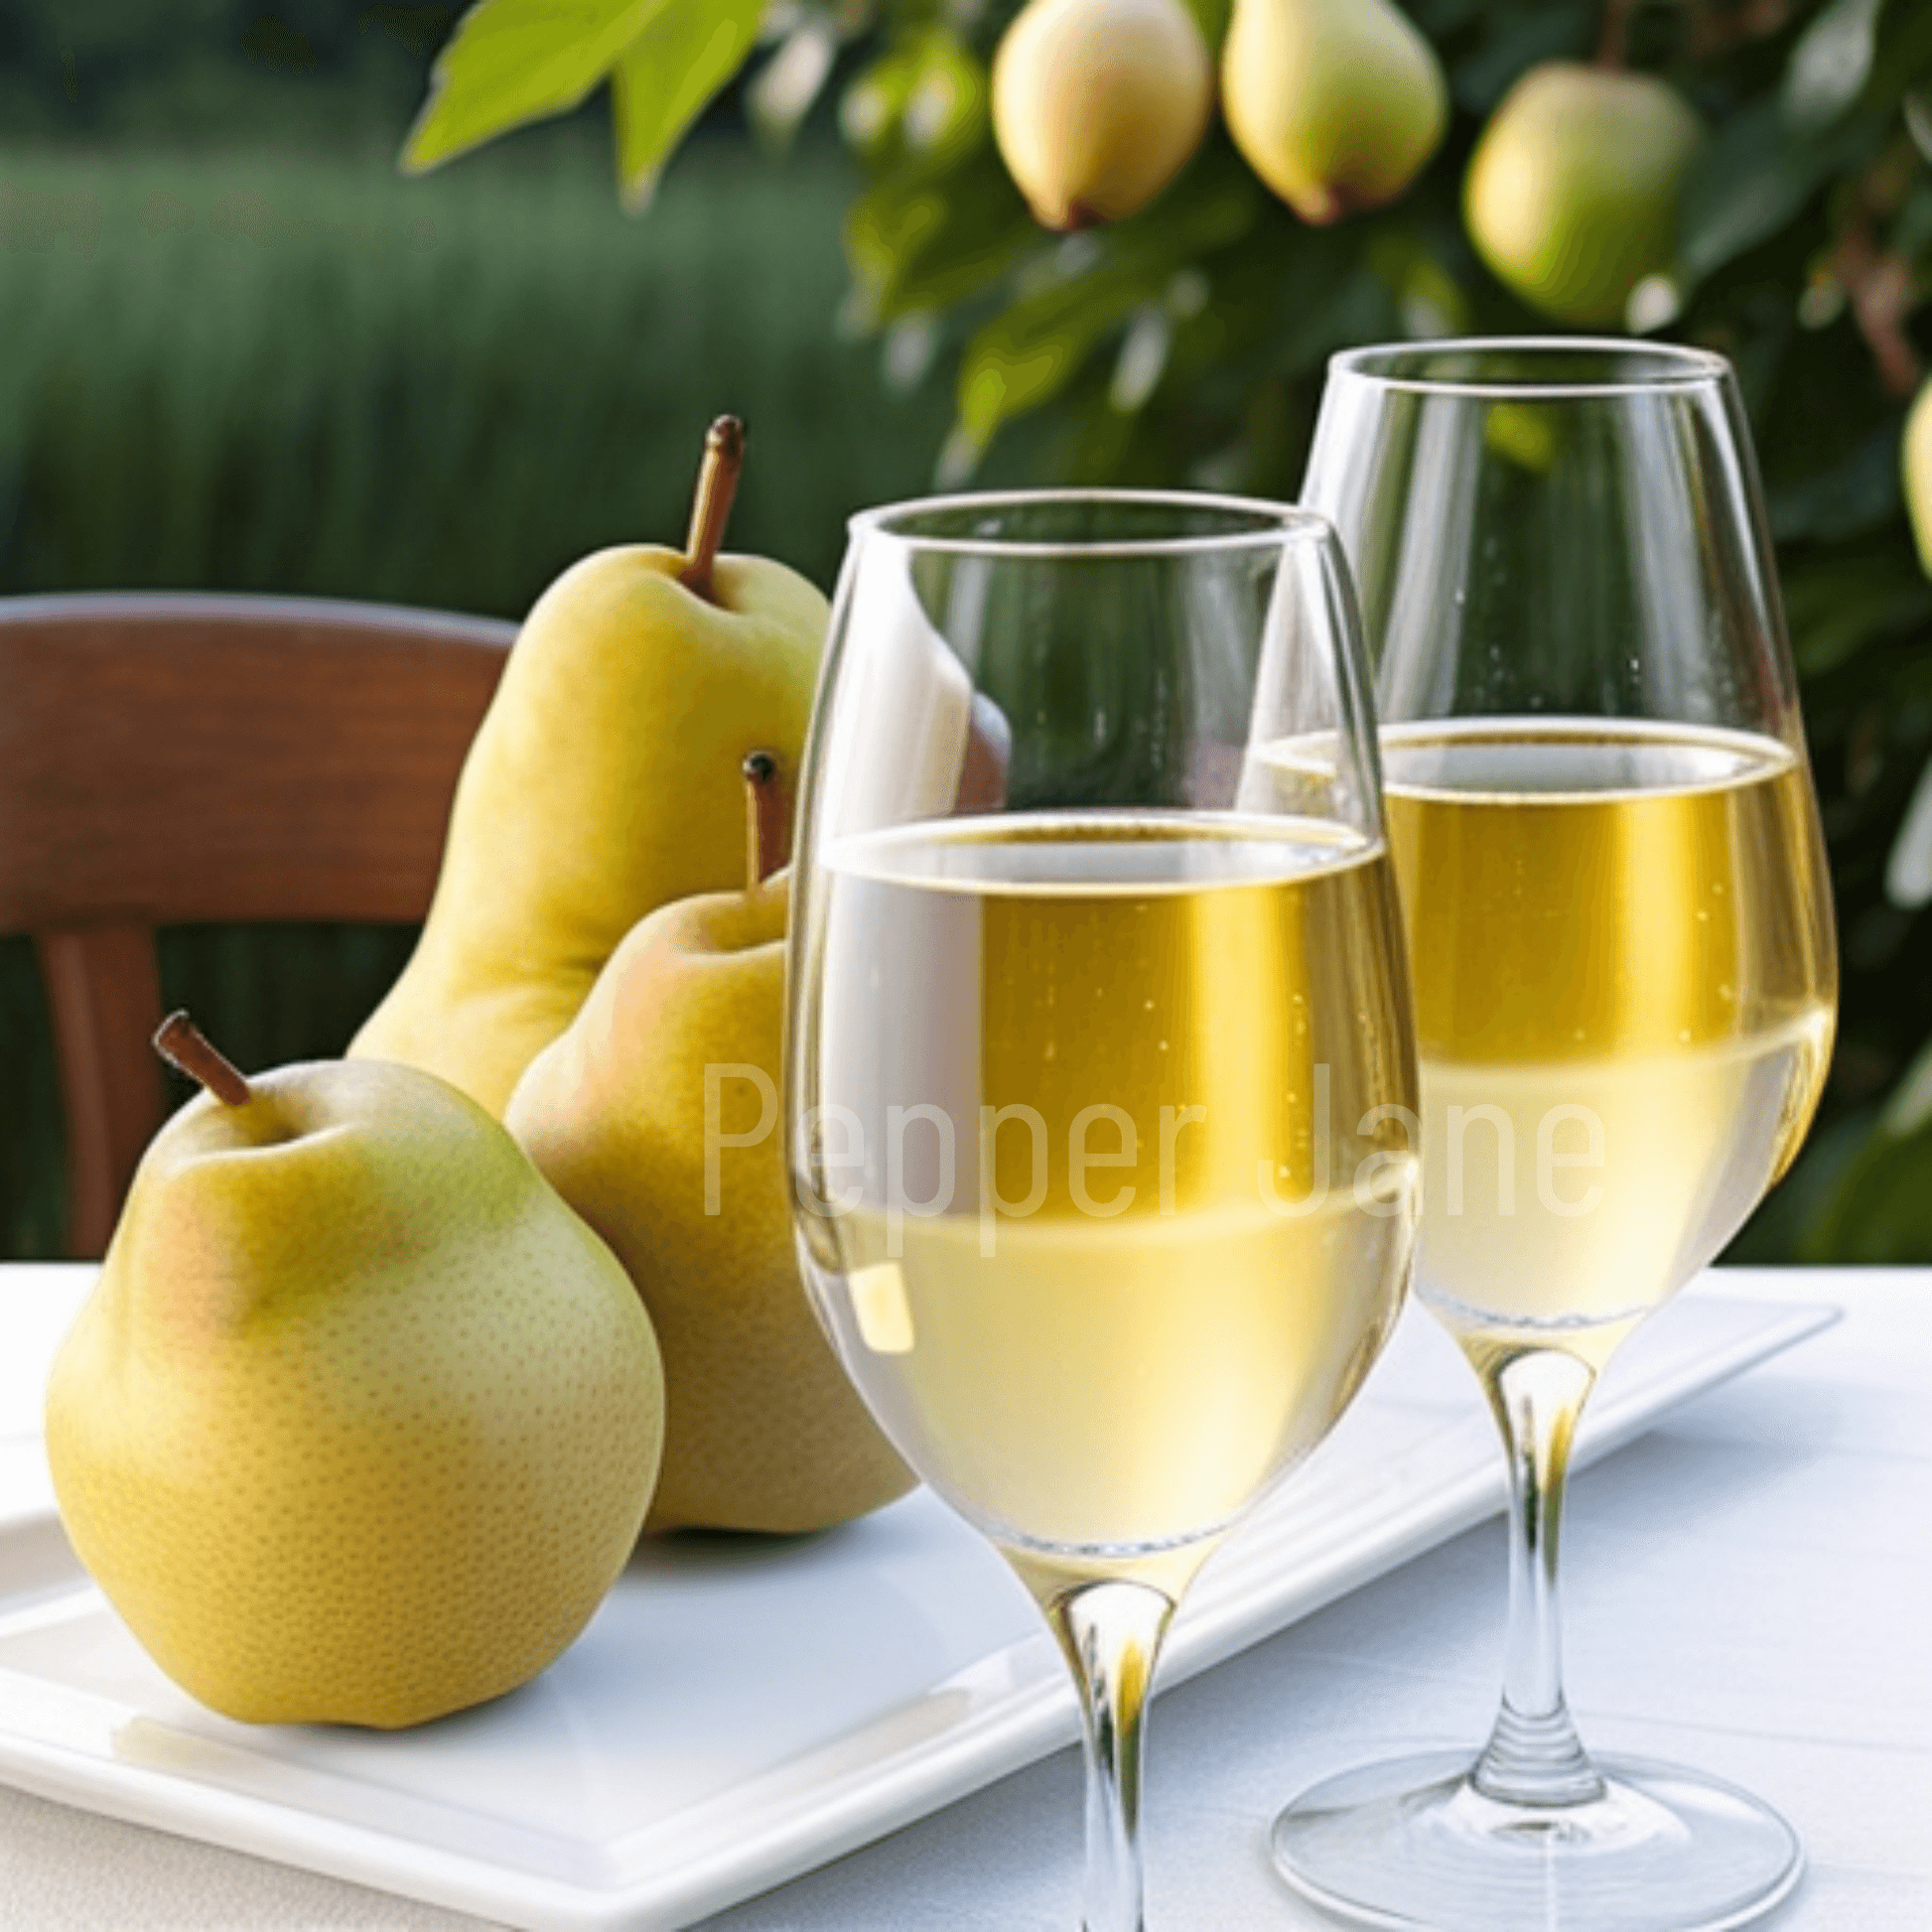 Sparkling Pear Wine Fragrance Oil ( Sparkling Pear Riesling BBW Type) - Pepper Jane's Colors and Scents